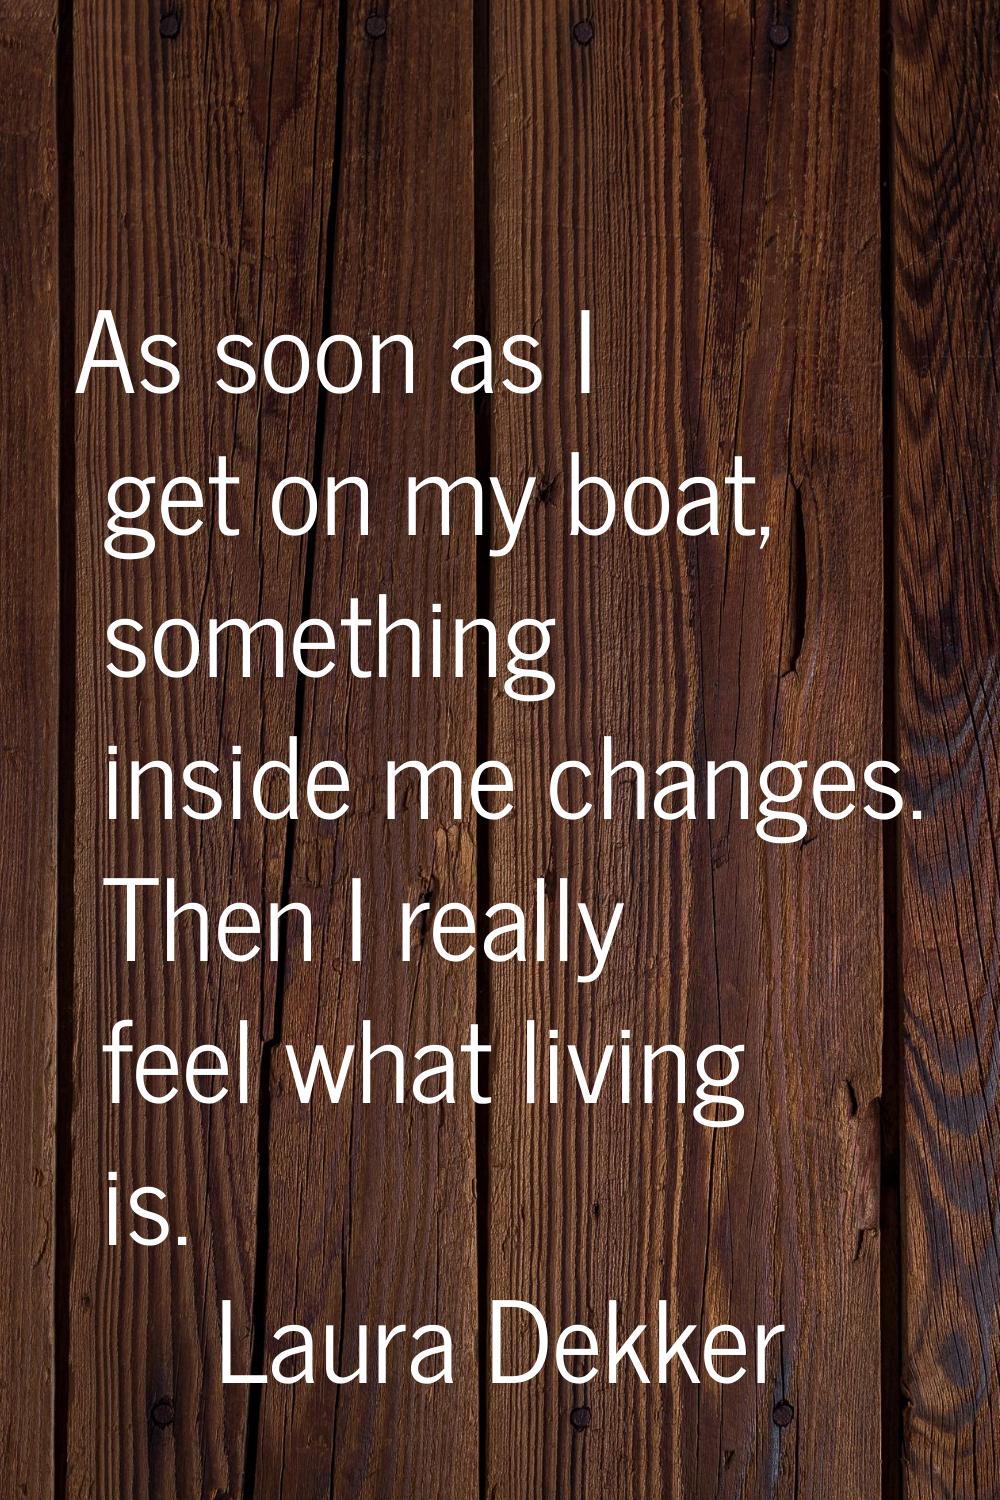 As soon as I get on my boat, something inside me changes. Then I really feel what living is.